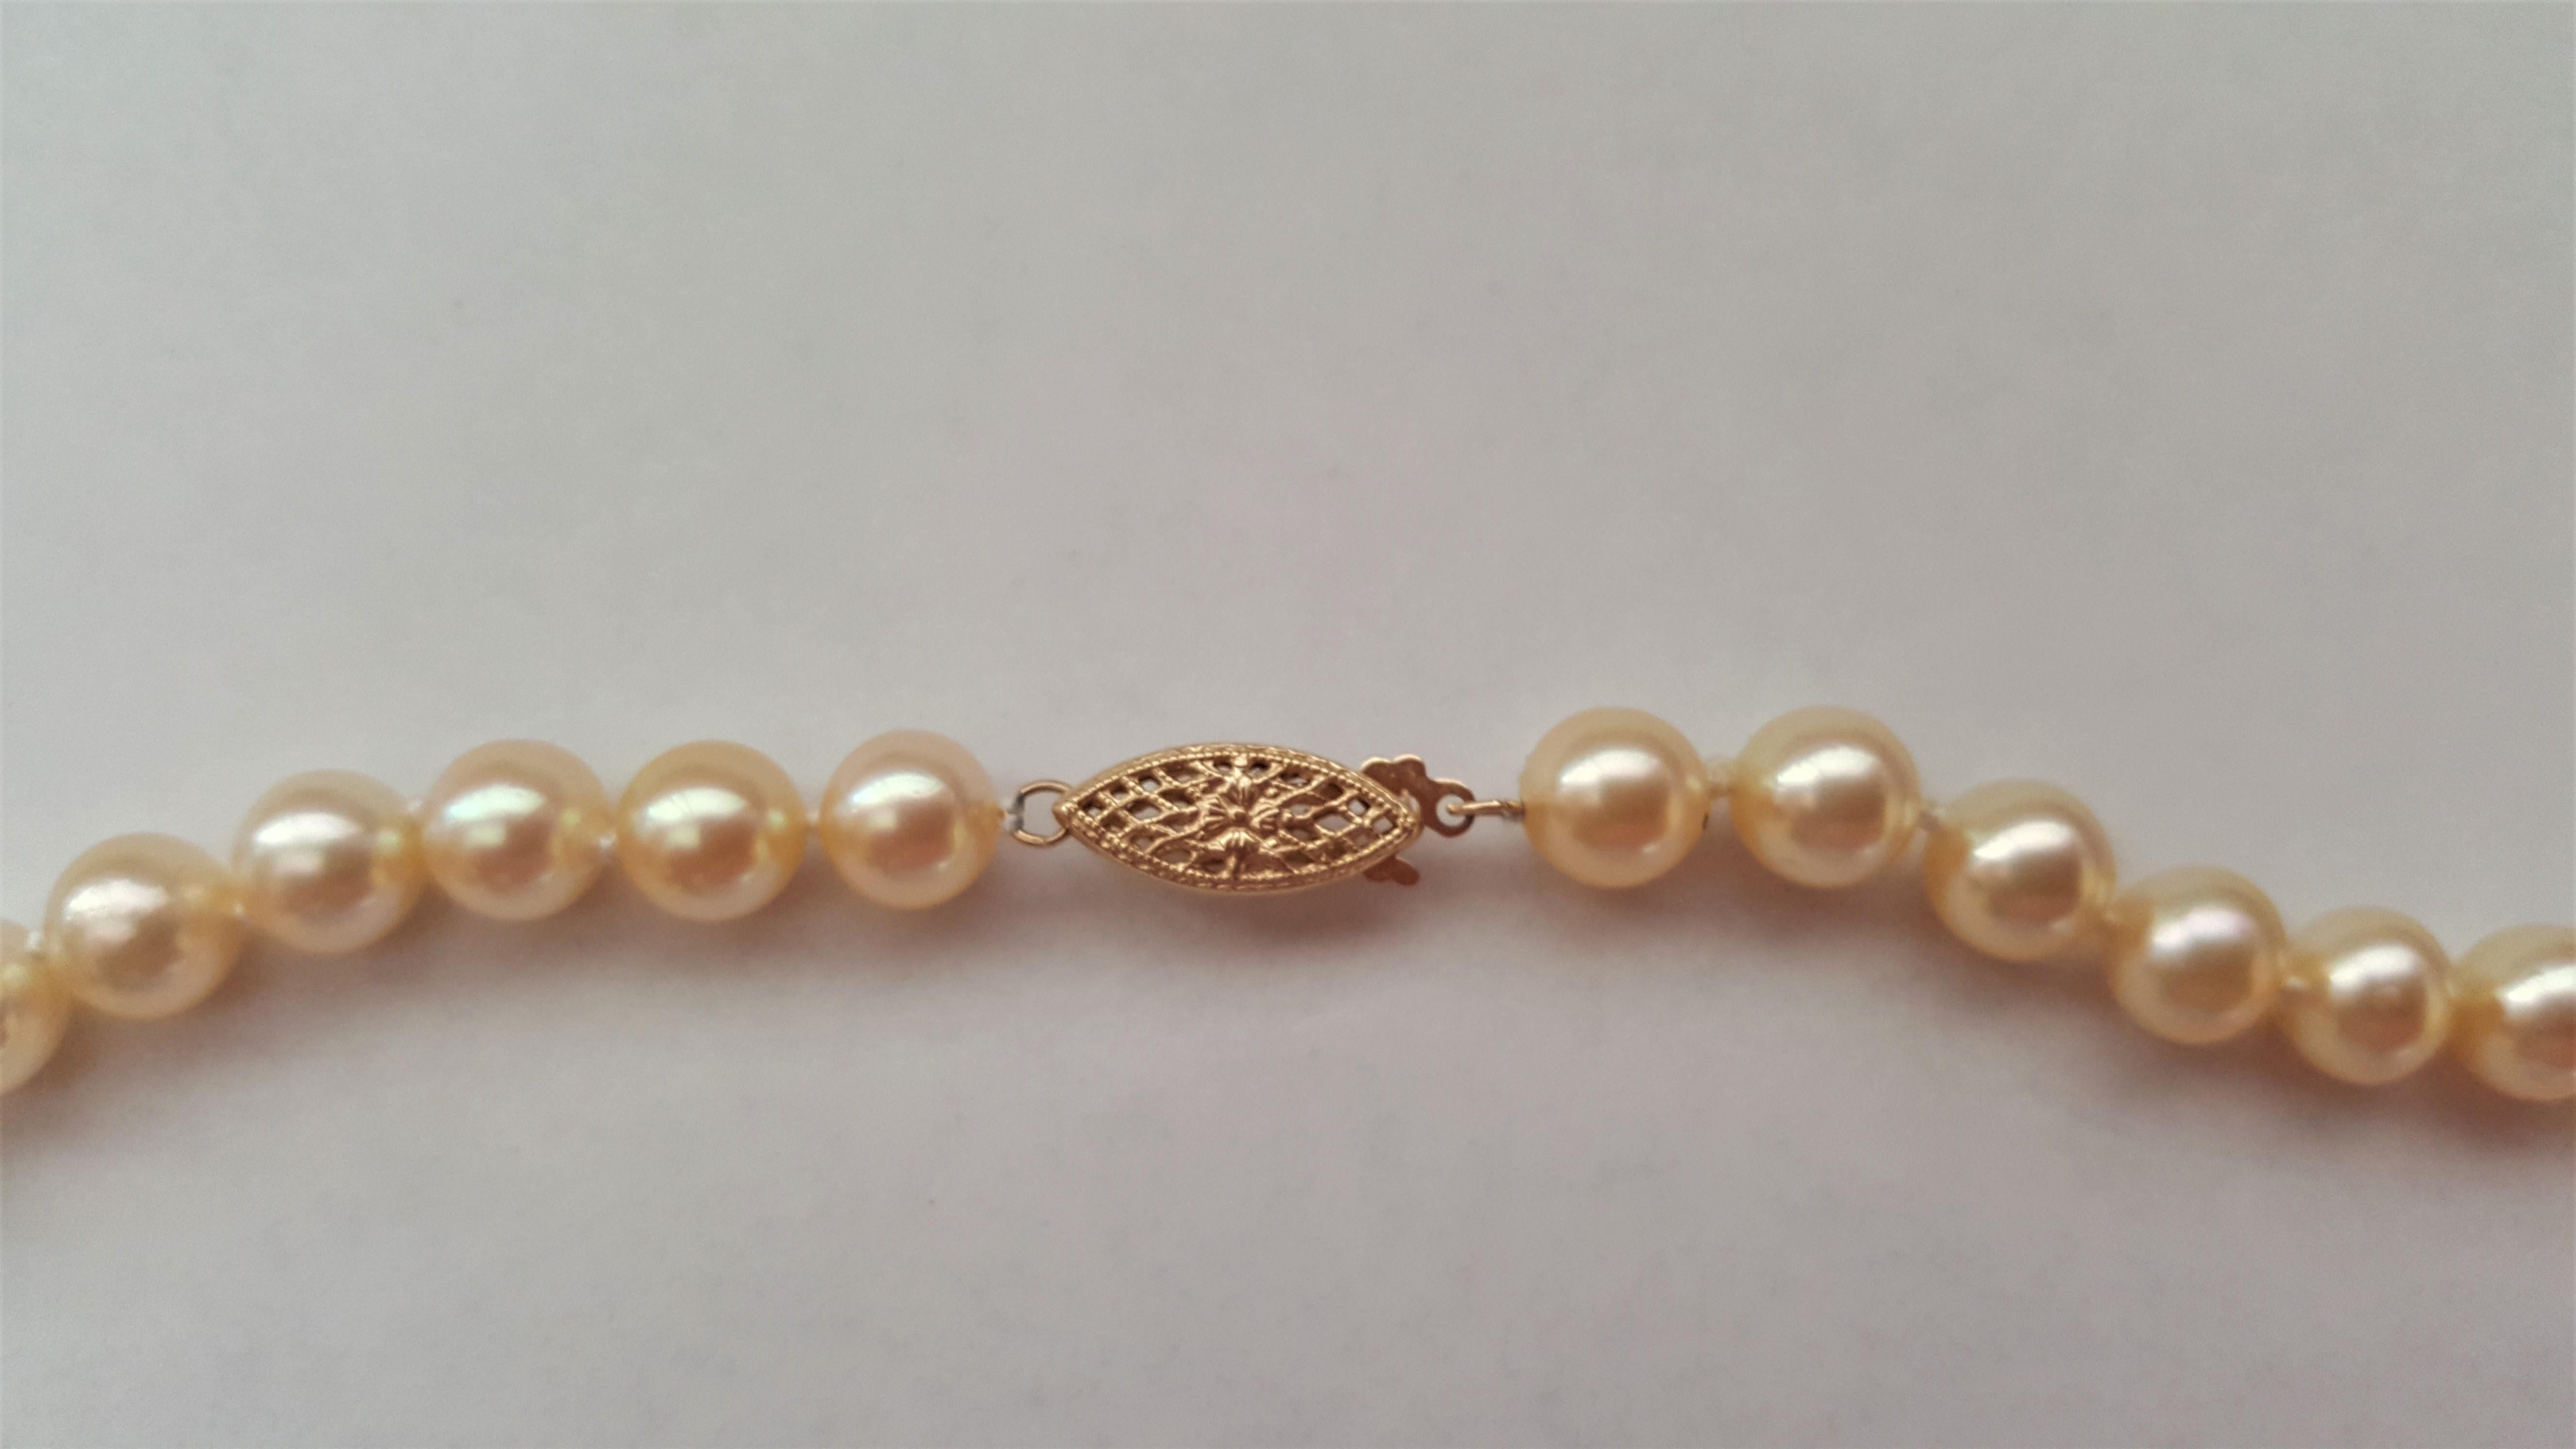 Cream Gold AAA Grade Cultured Pearl Set Necklace Bracelet 14kt, 7+mm, 27 Inches For Sale 2